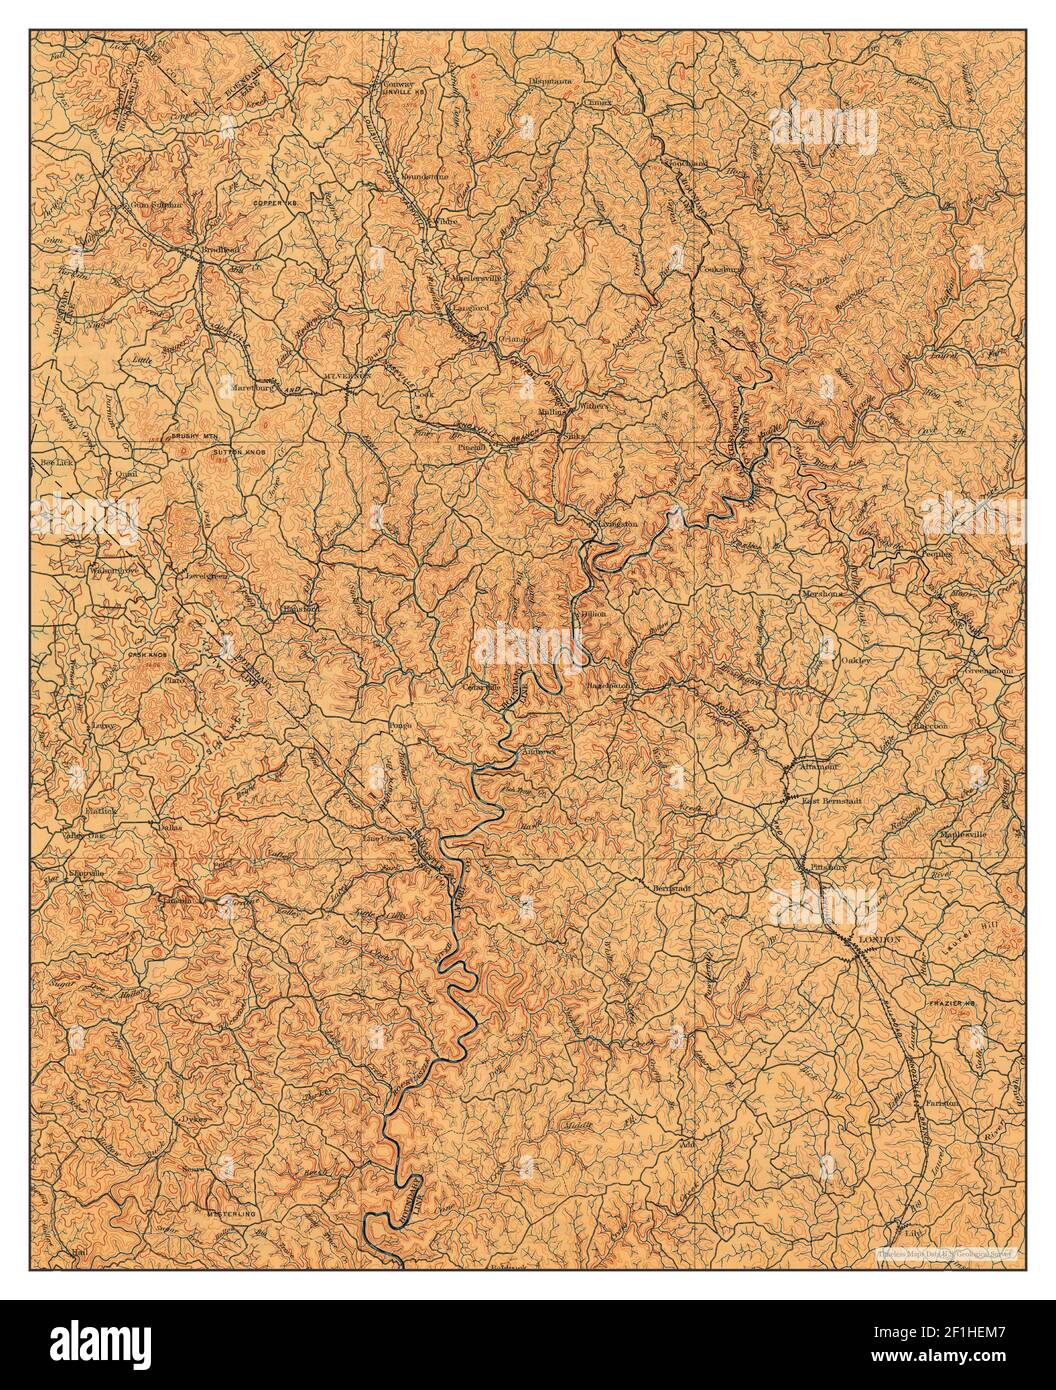 London, Kentucky, map 1897, 1:125000, United States of America by Timeless Maps, data U.S. Geological Survey Stock Photo